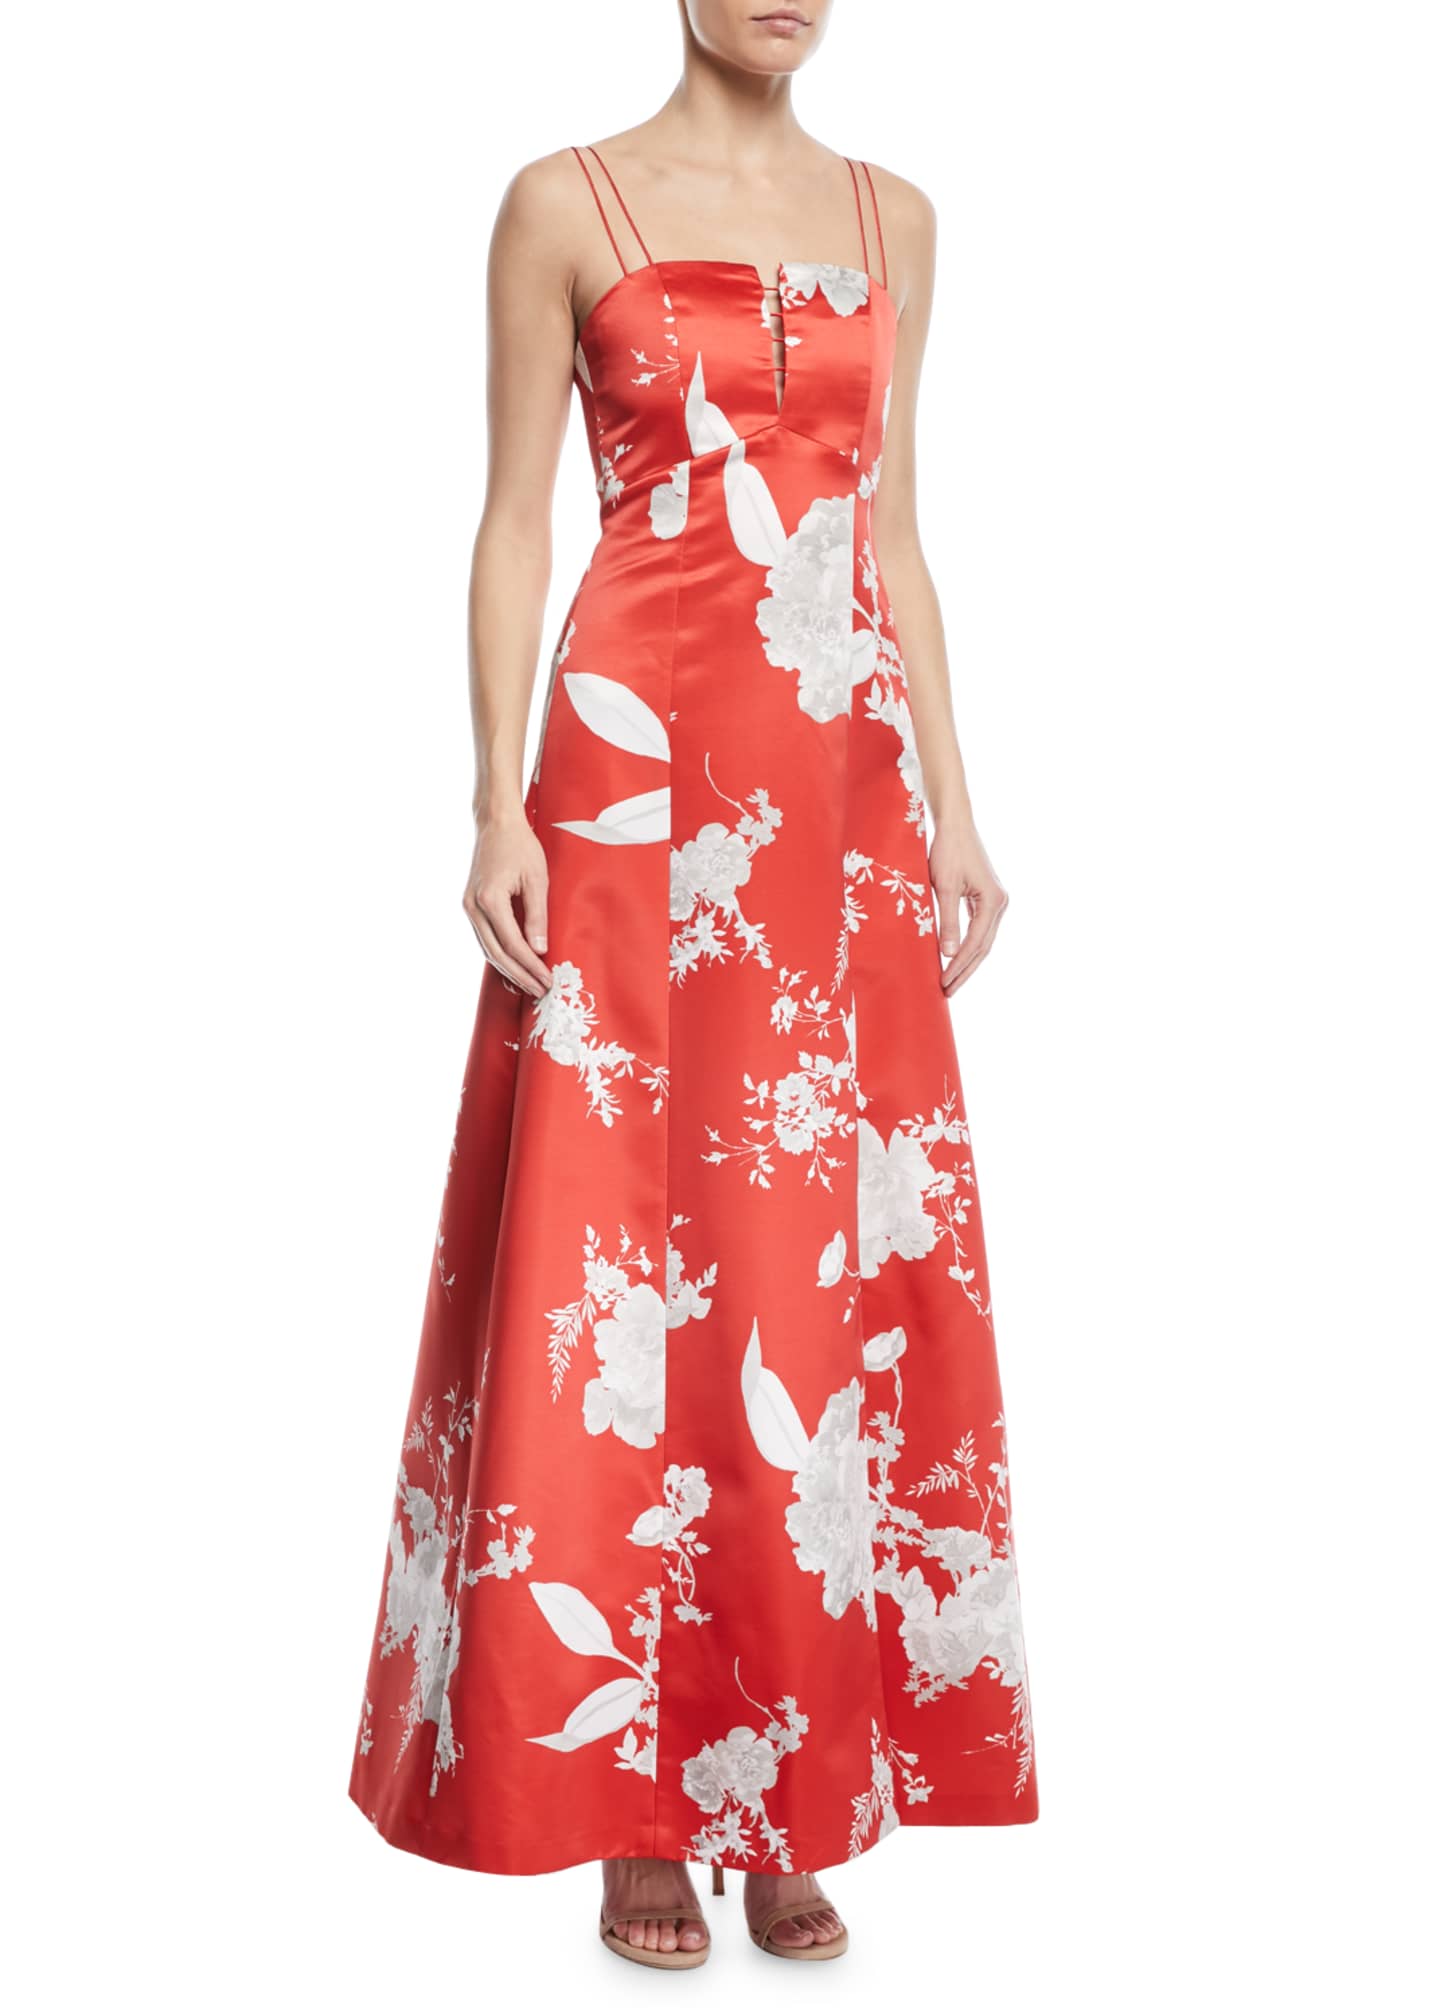 Monique Lhuillier Strapless Floral-Print Draped Evening Gown with Train